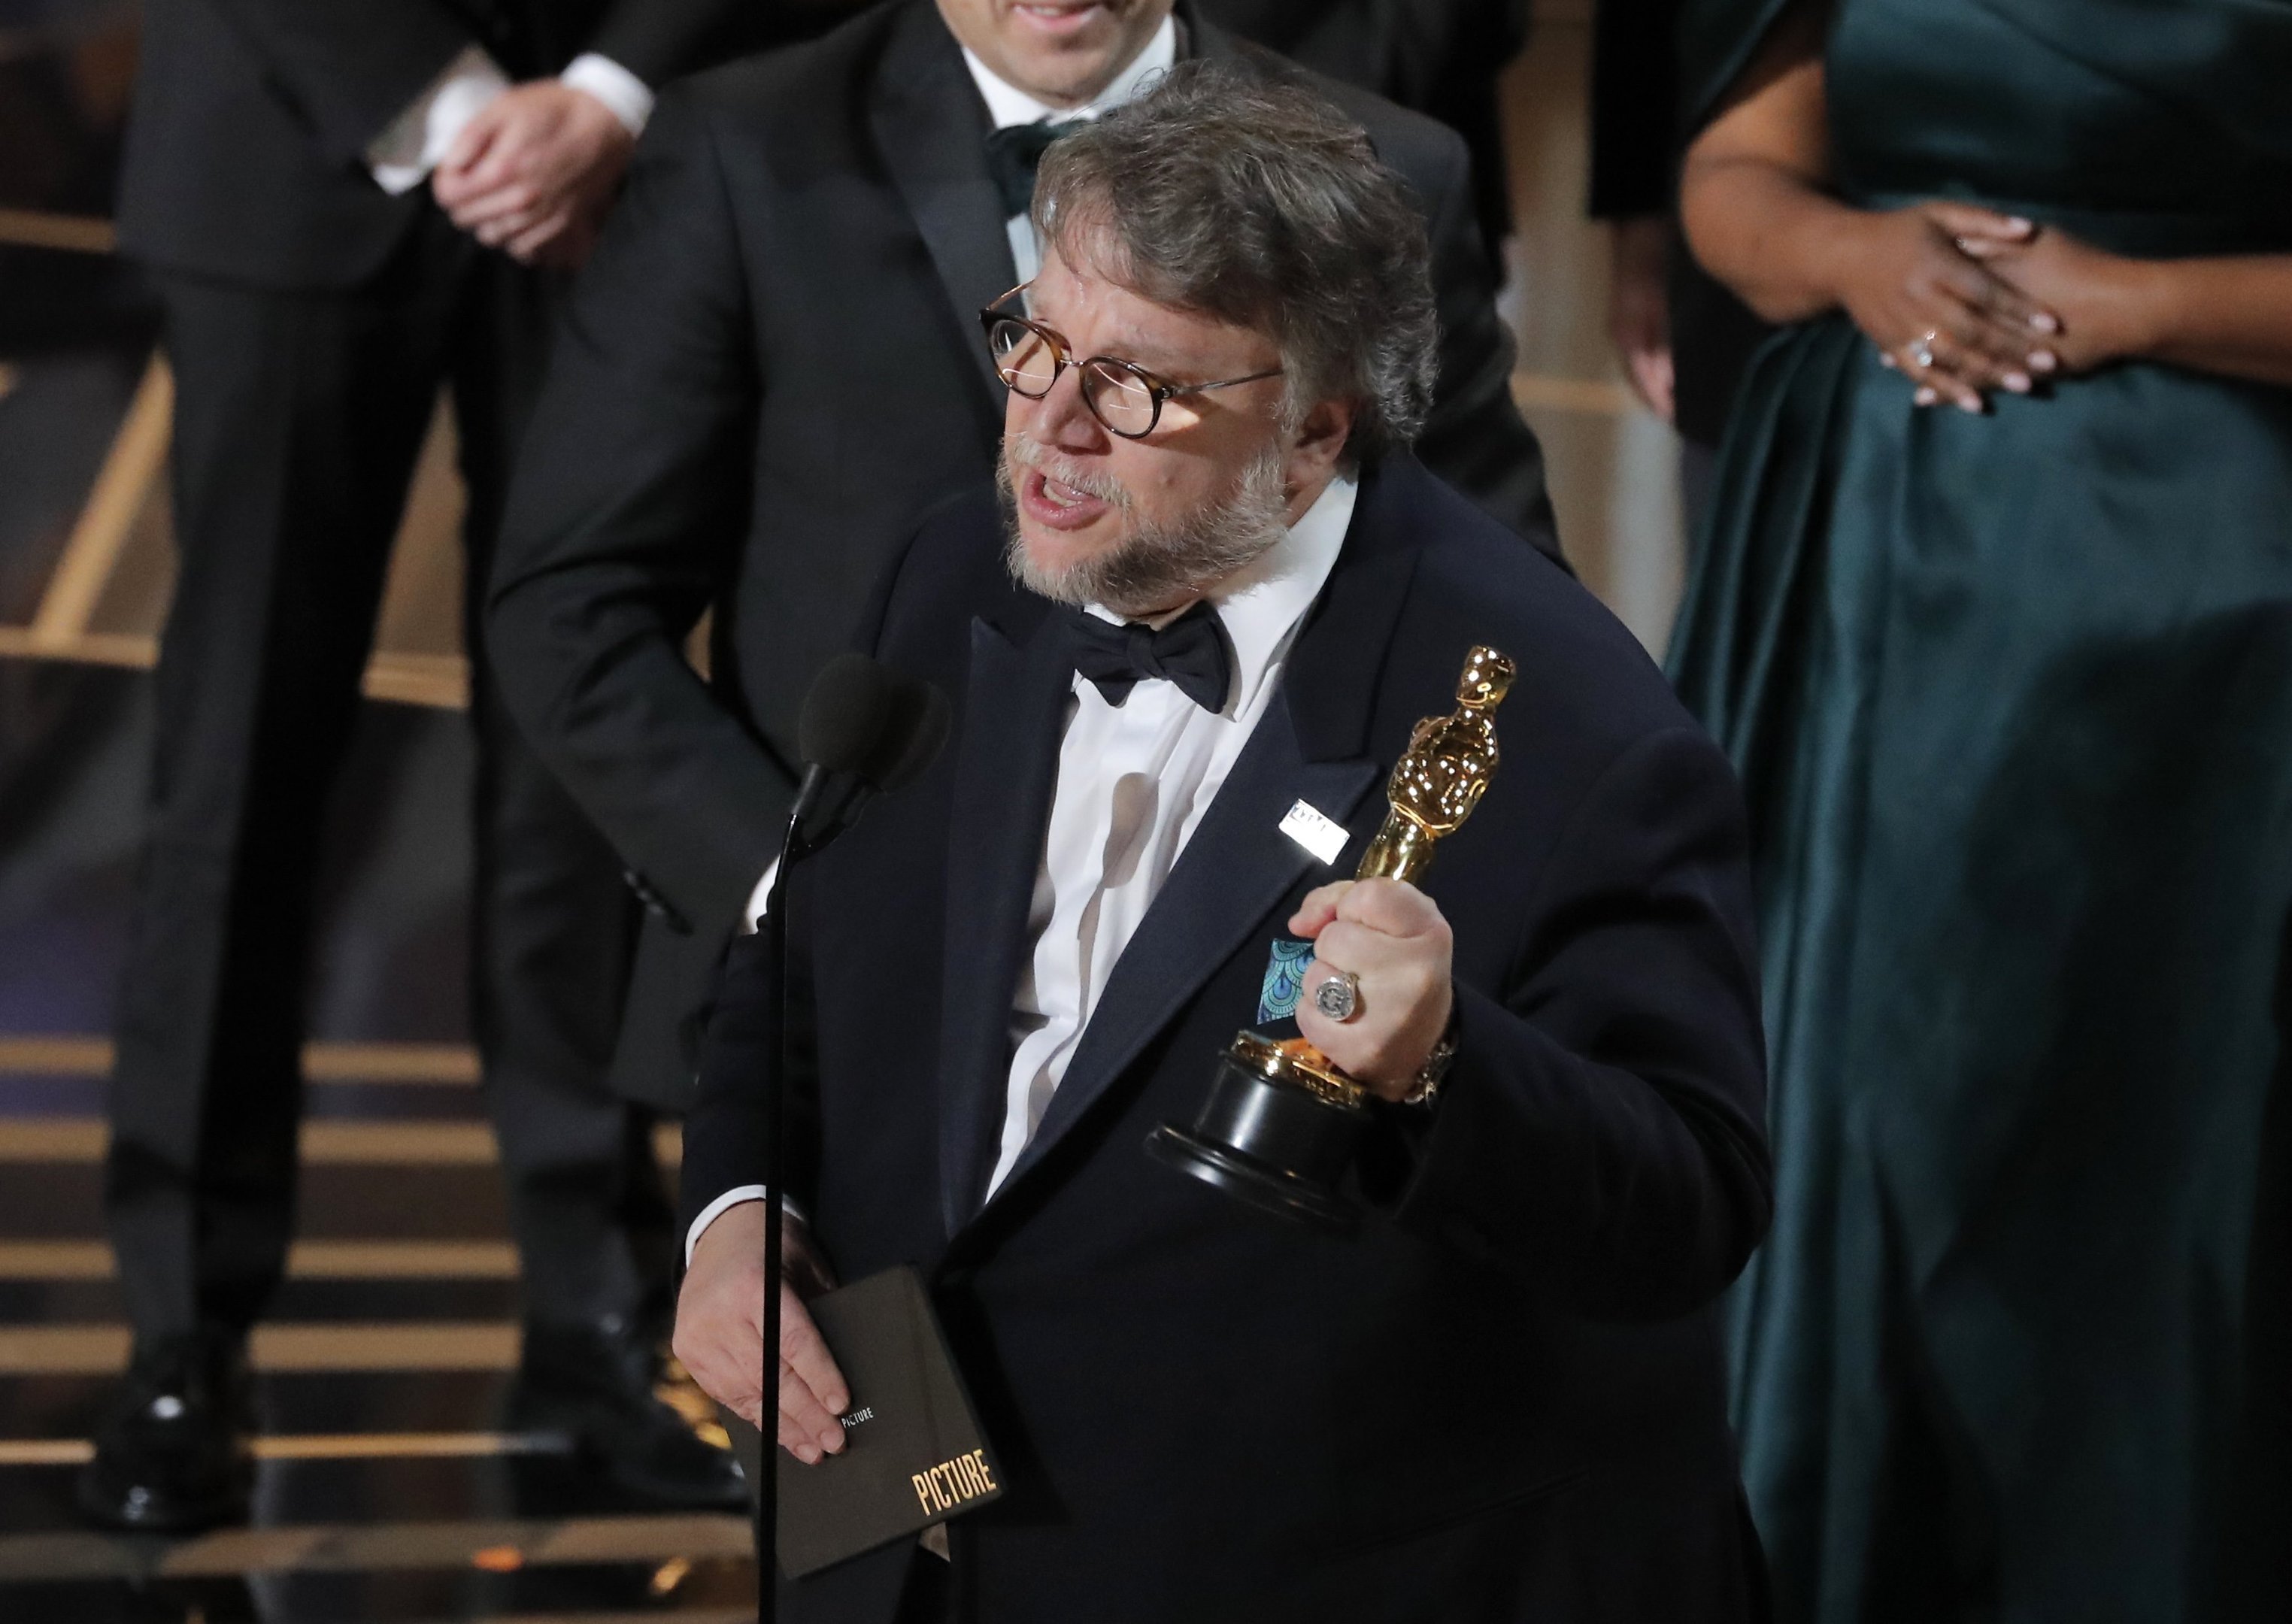 90th Academy Awards - Oscars Show - Hollywood, California, U.S., 04/03/2018 - Guillermo del Toro accepts the Oscar for Best Picture for "The Shape of Water." REUTERS/Lucas Jackson